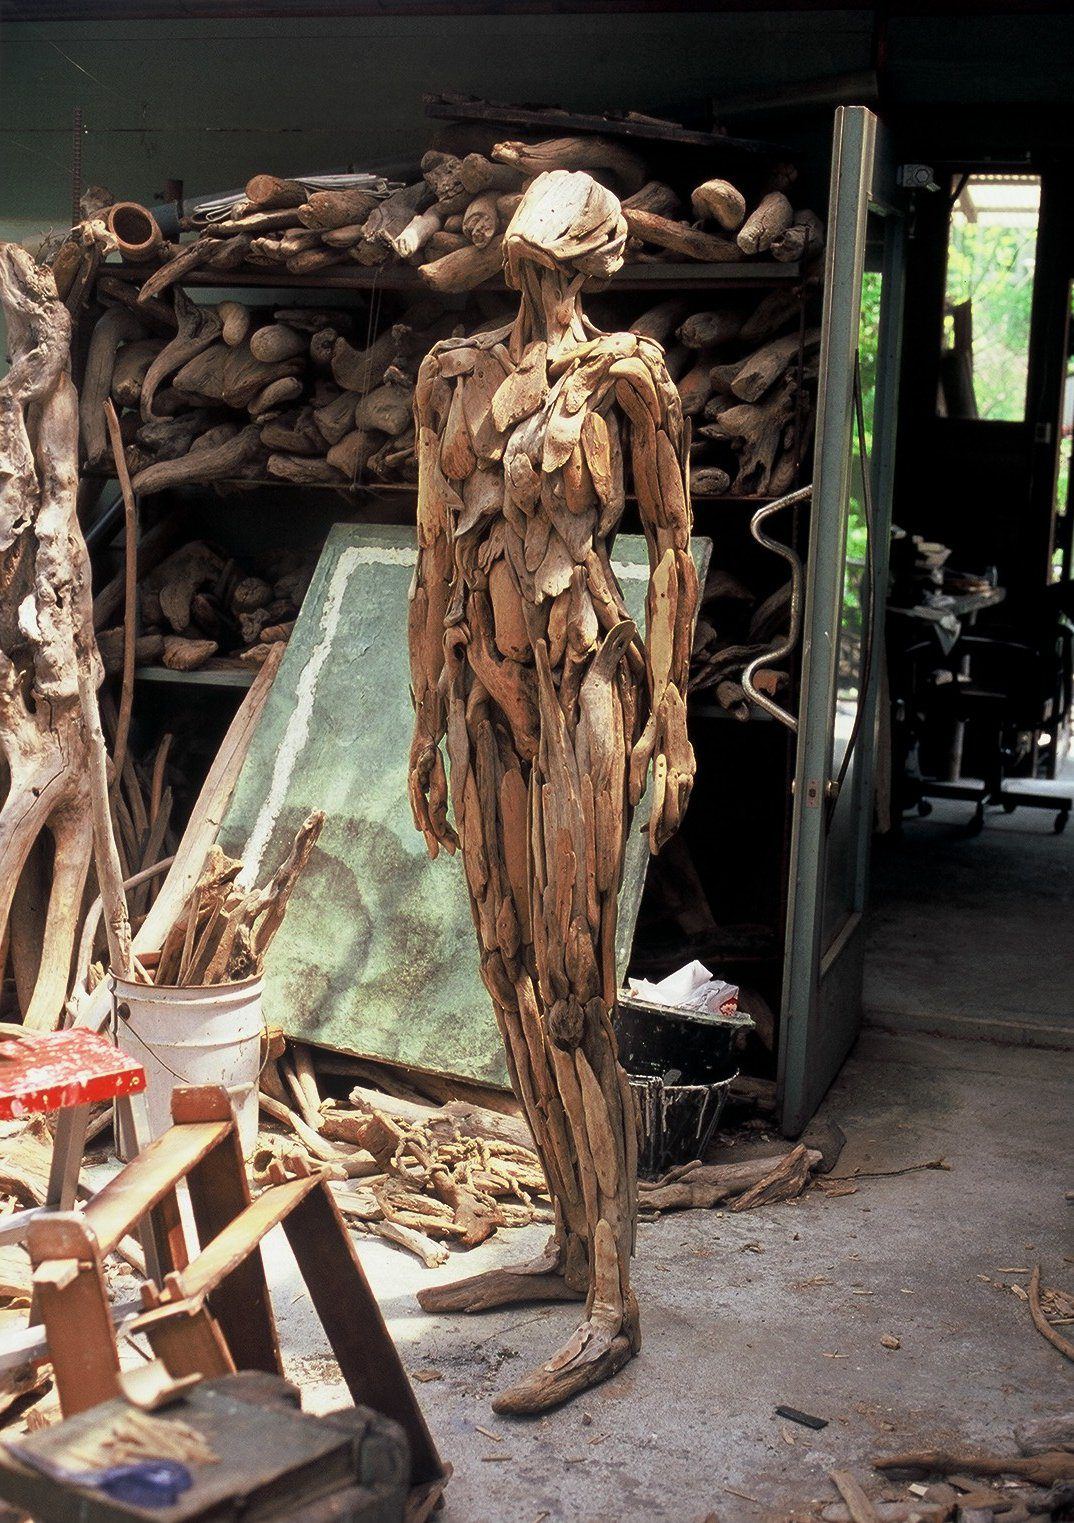 Eerie Human Like Sculptures Made From Driftwood By Nagato Iwasaki (1)